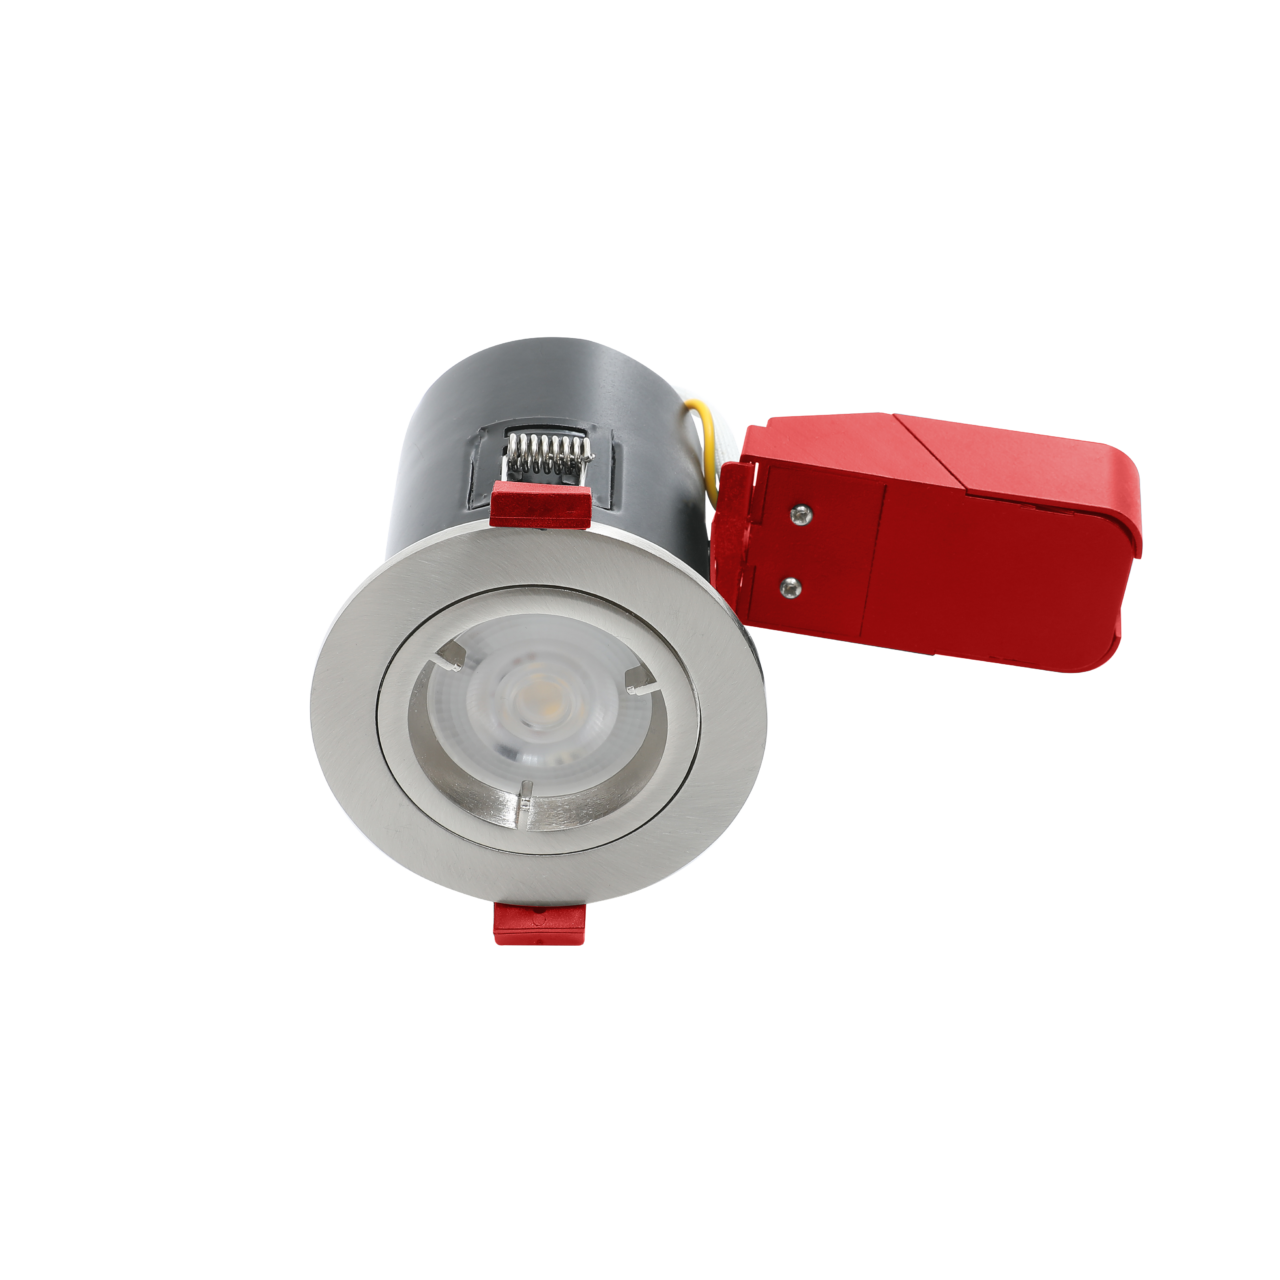 Difference Between Fire Rated and Non-Fire Rated Downlights